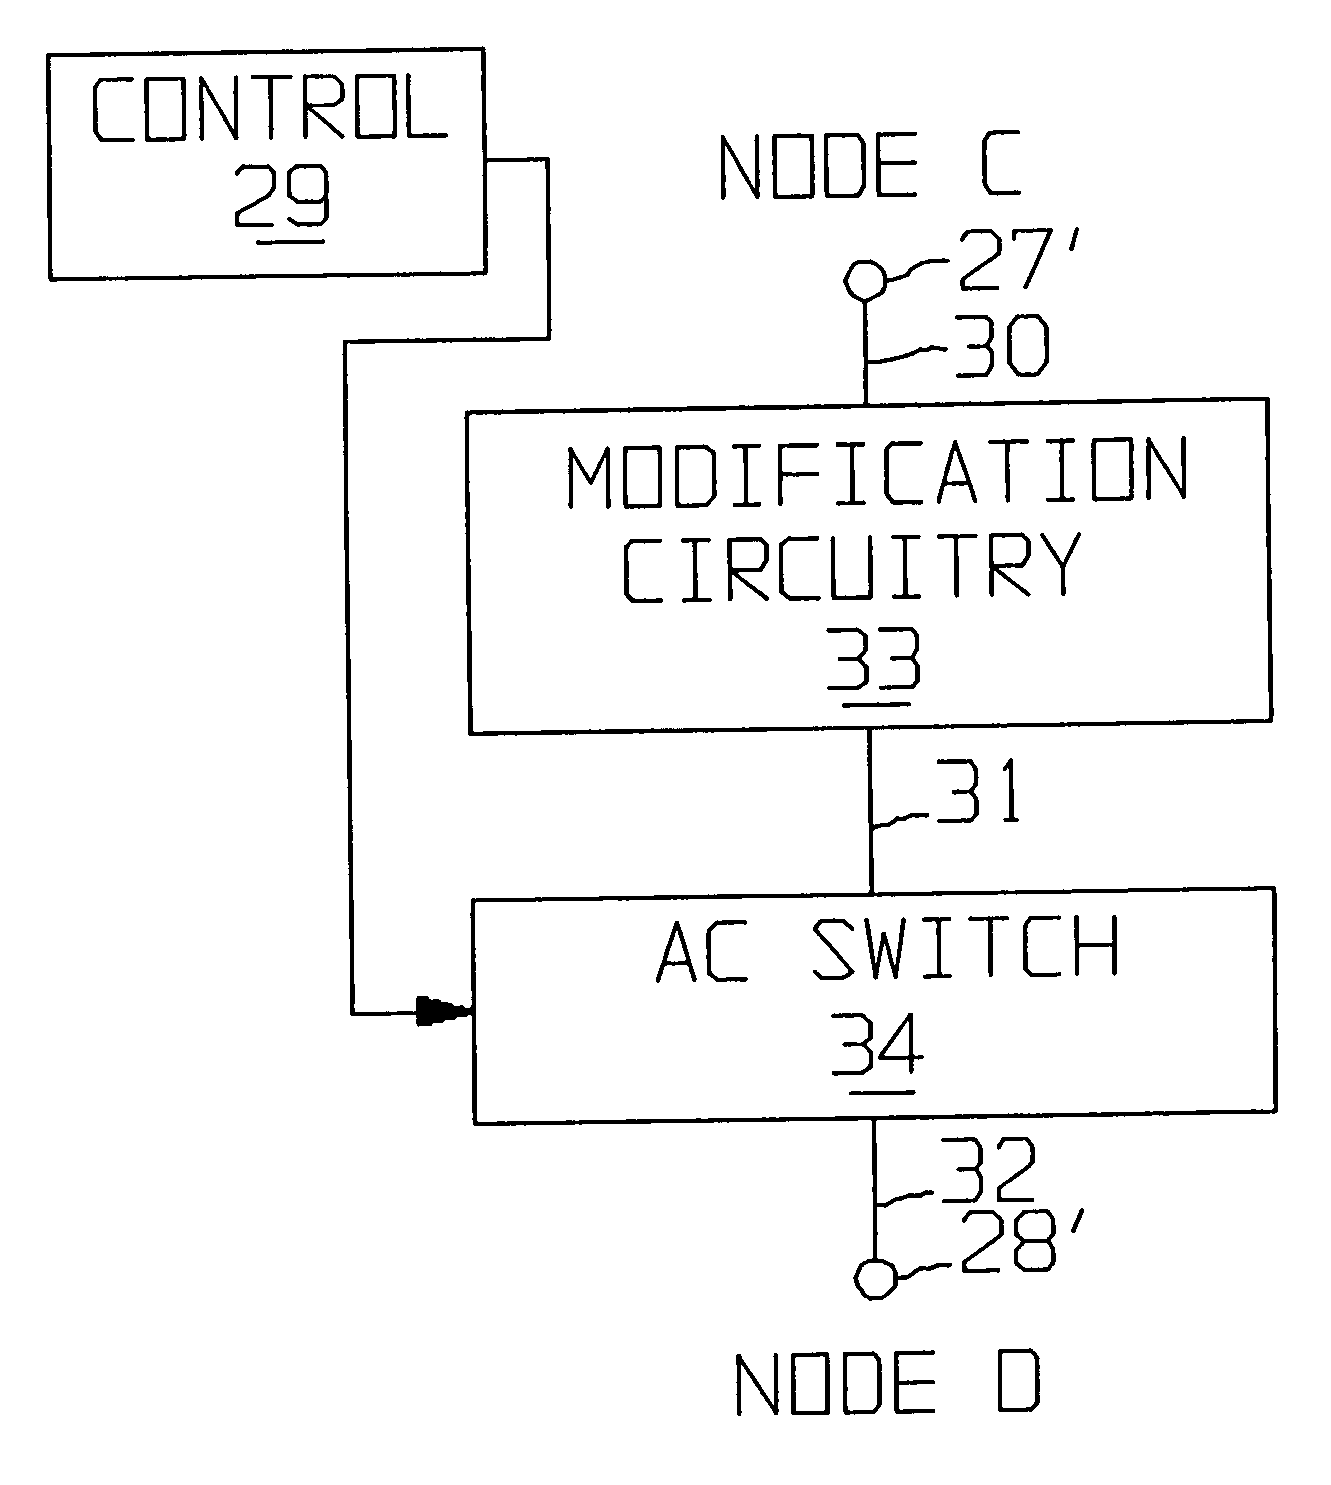 Apparatus, circuitry, signals and methods for cleaning and/or processing with sound